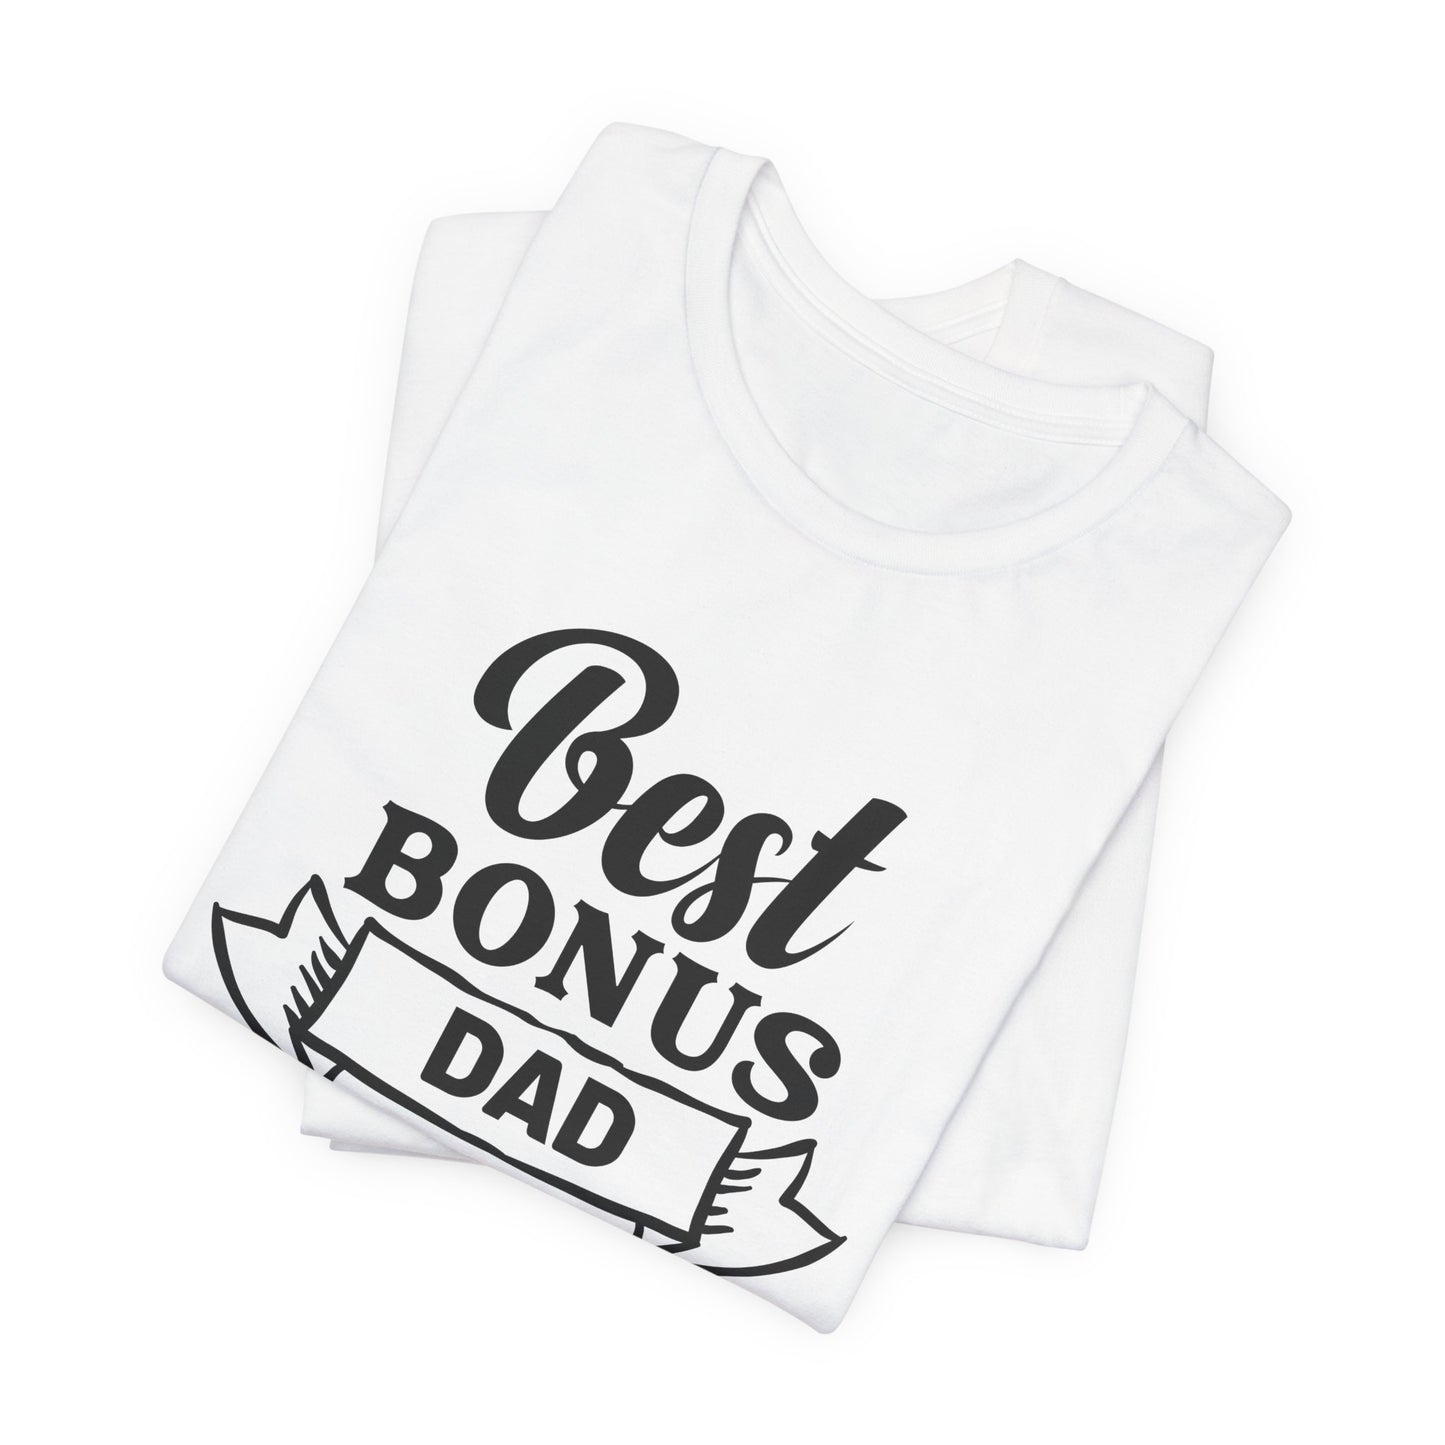 Bonus Dad T-Shirt For Father's Day Gift T Shirt For Step Dad TShirt